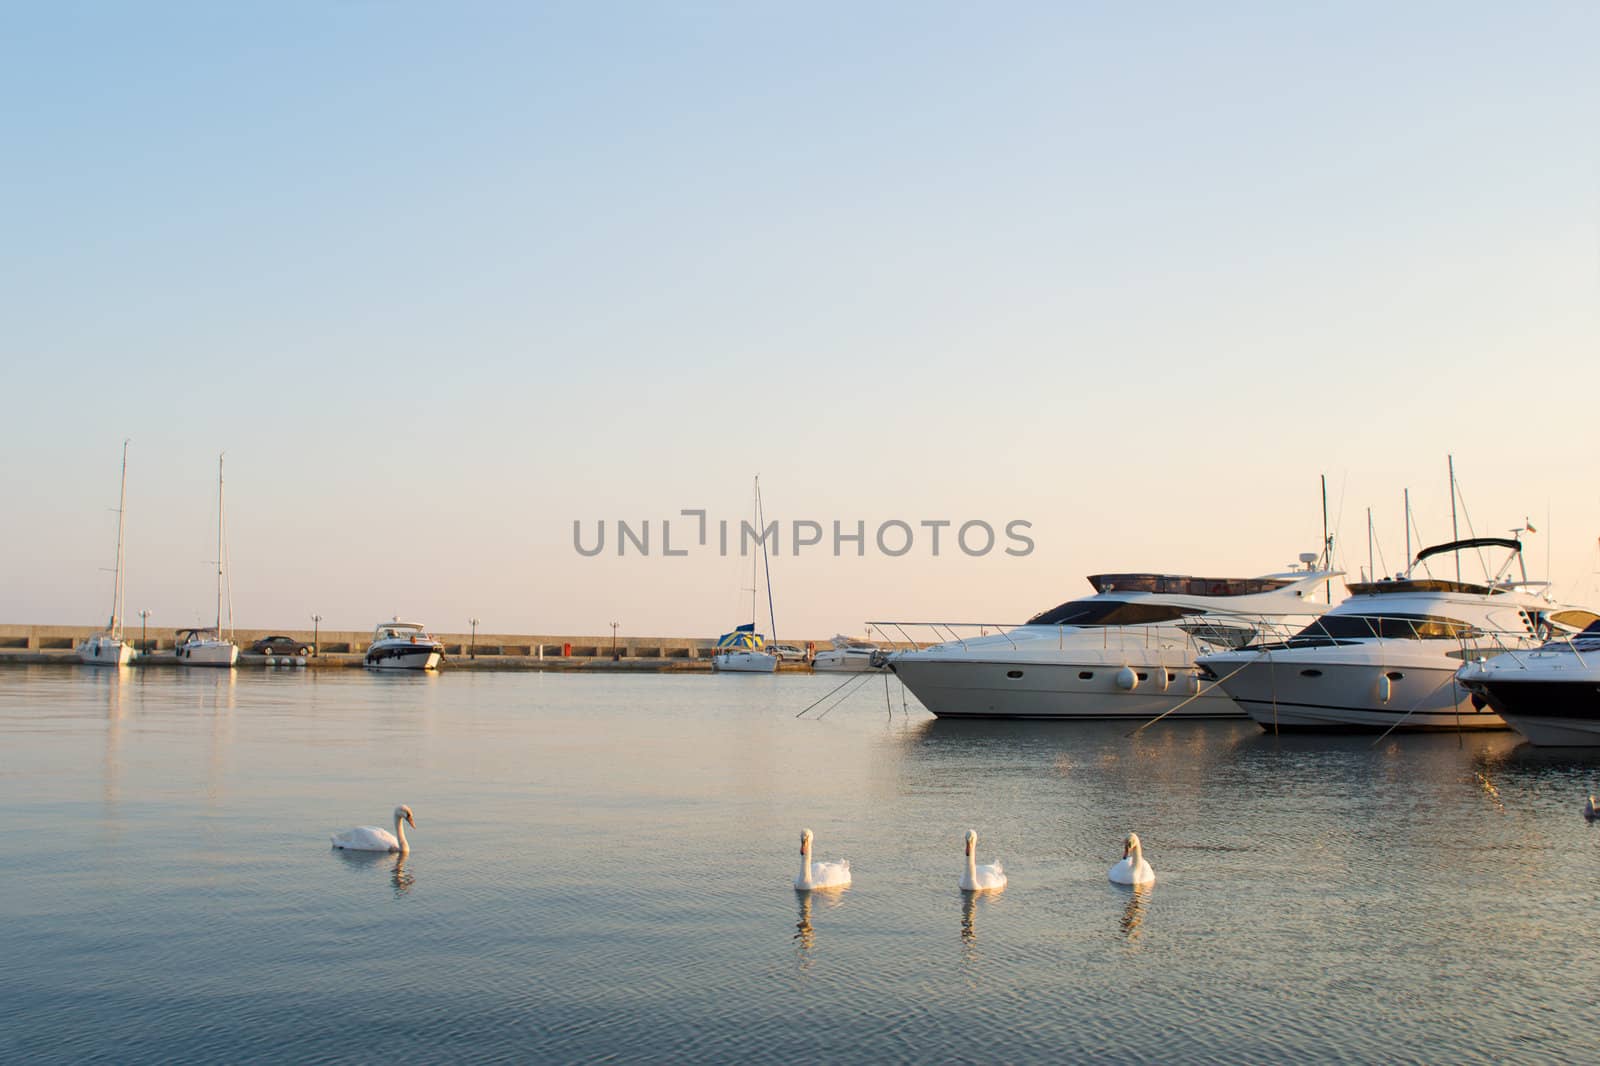 Swans and yachts in a silent bay